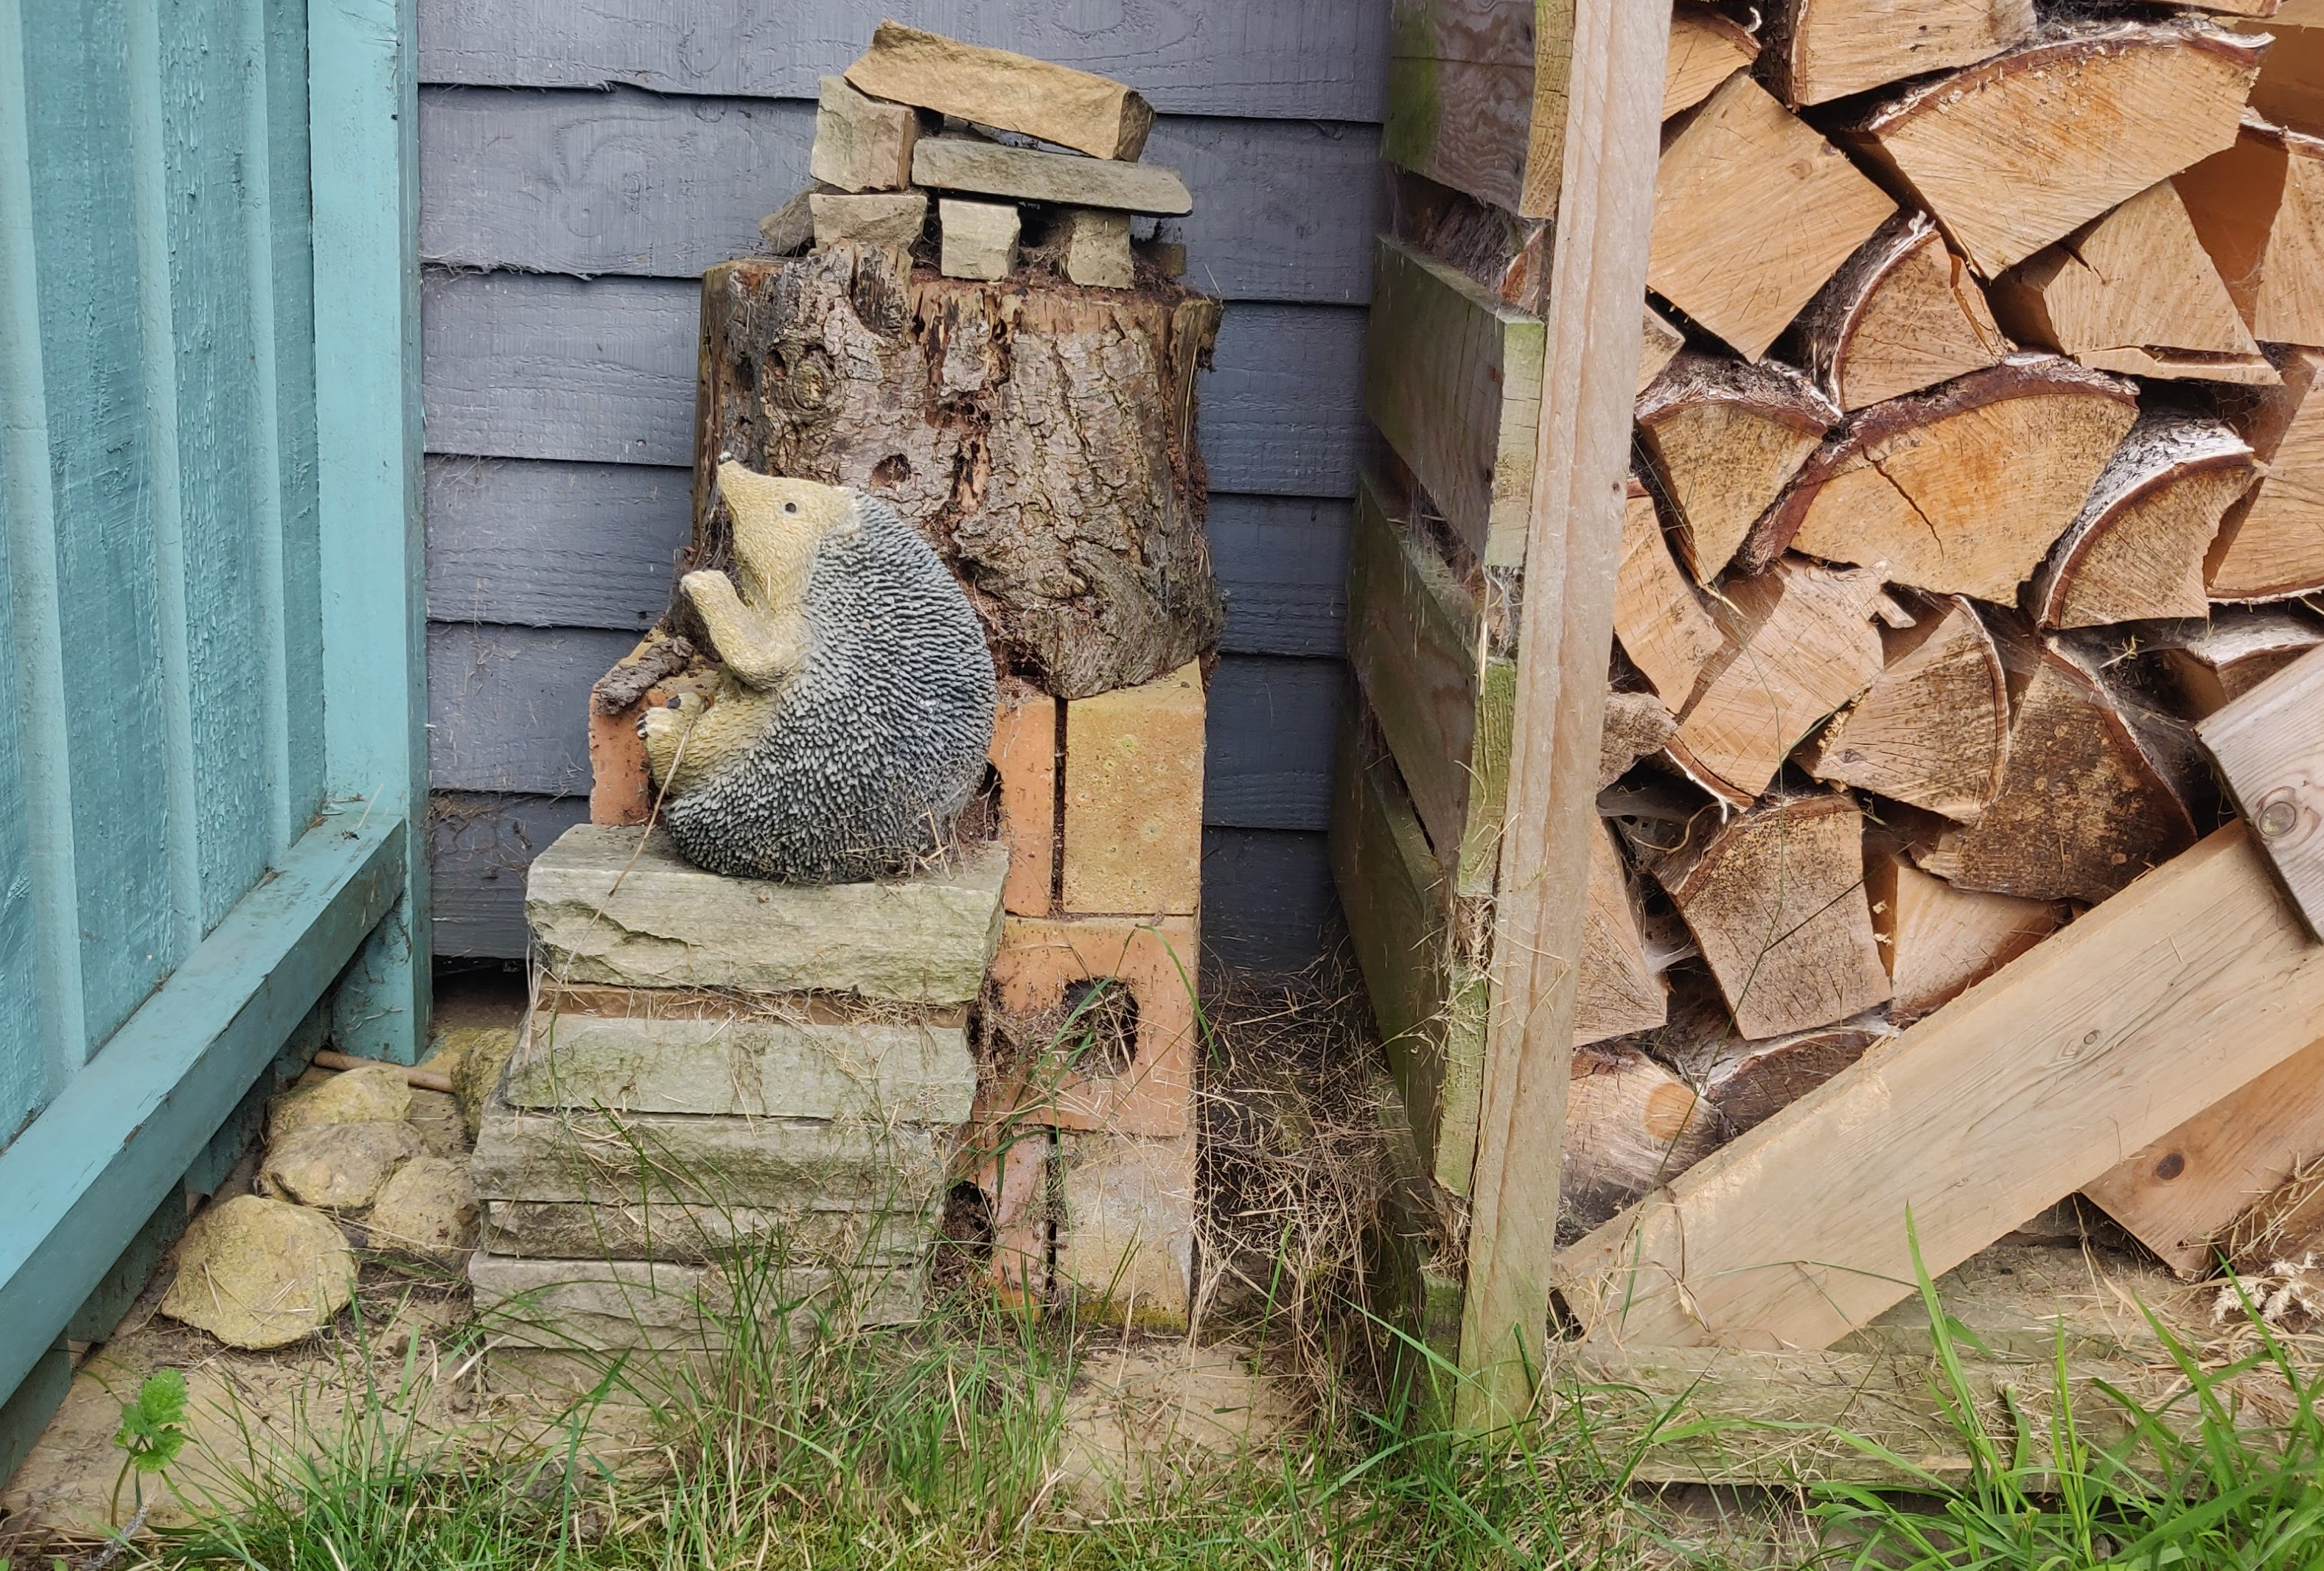 Bug house made with bricks, stones, logs and pine cones